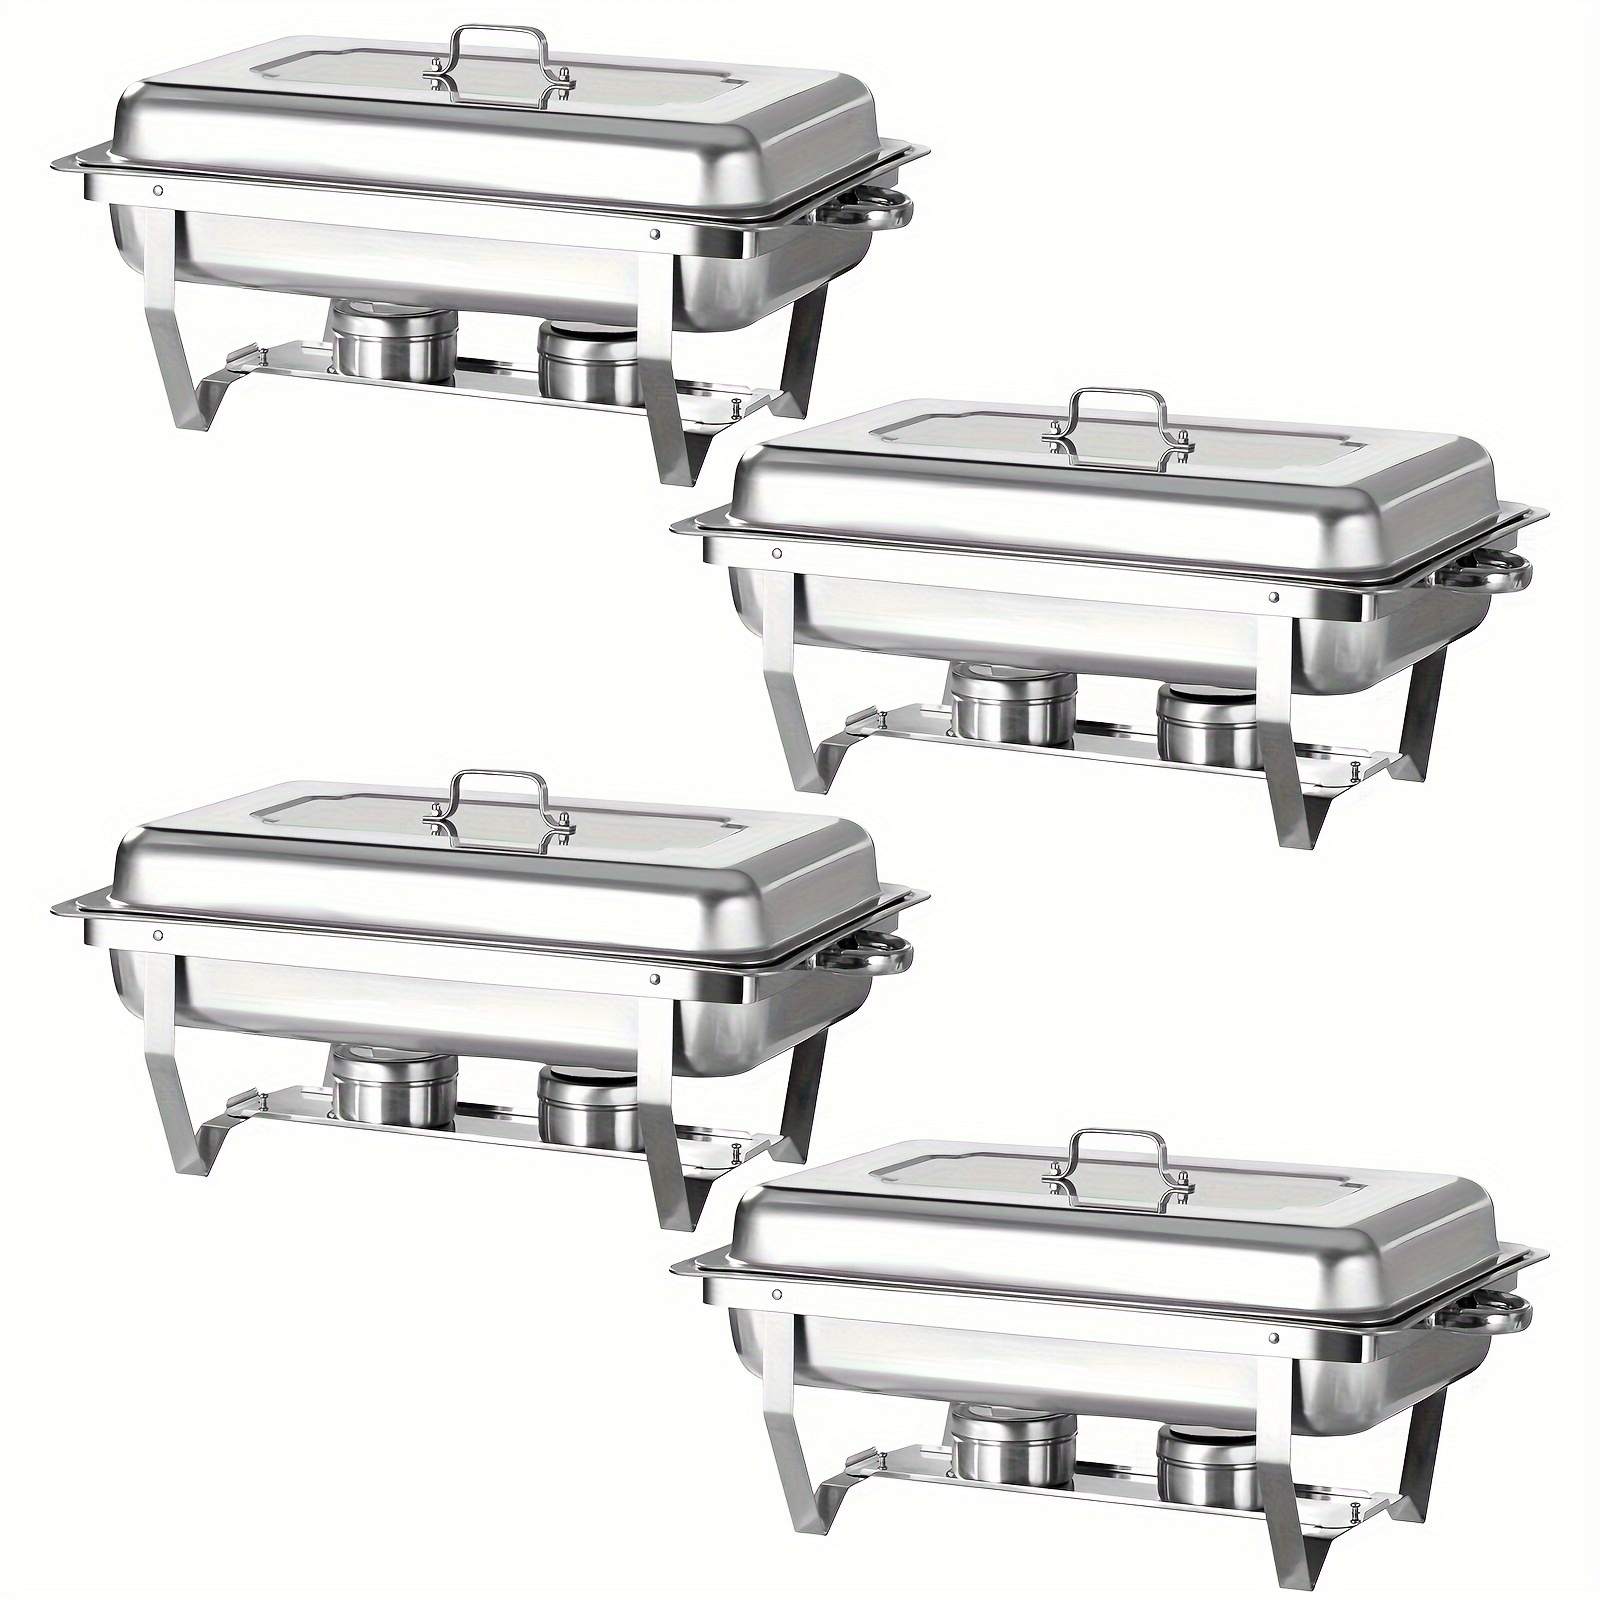 

Chafing Dish Buffet Set 8qt Stainless Steel Food Warmer Chafer Complete Set With Water Pan, Chafing Fuel Holder For Party Catering